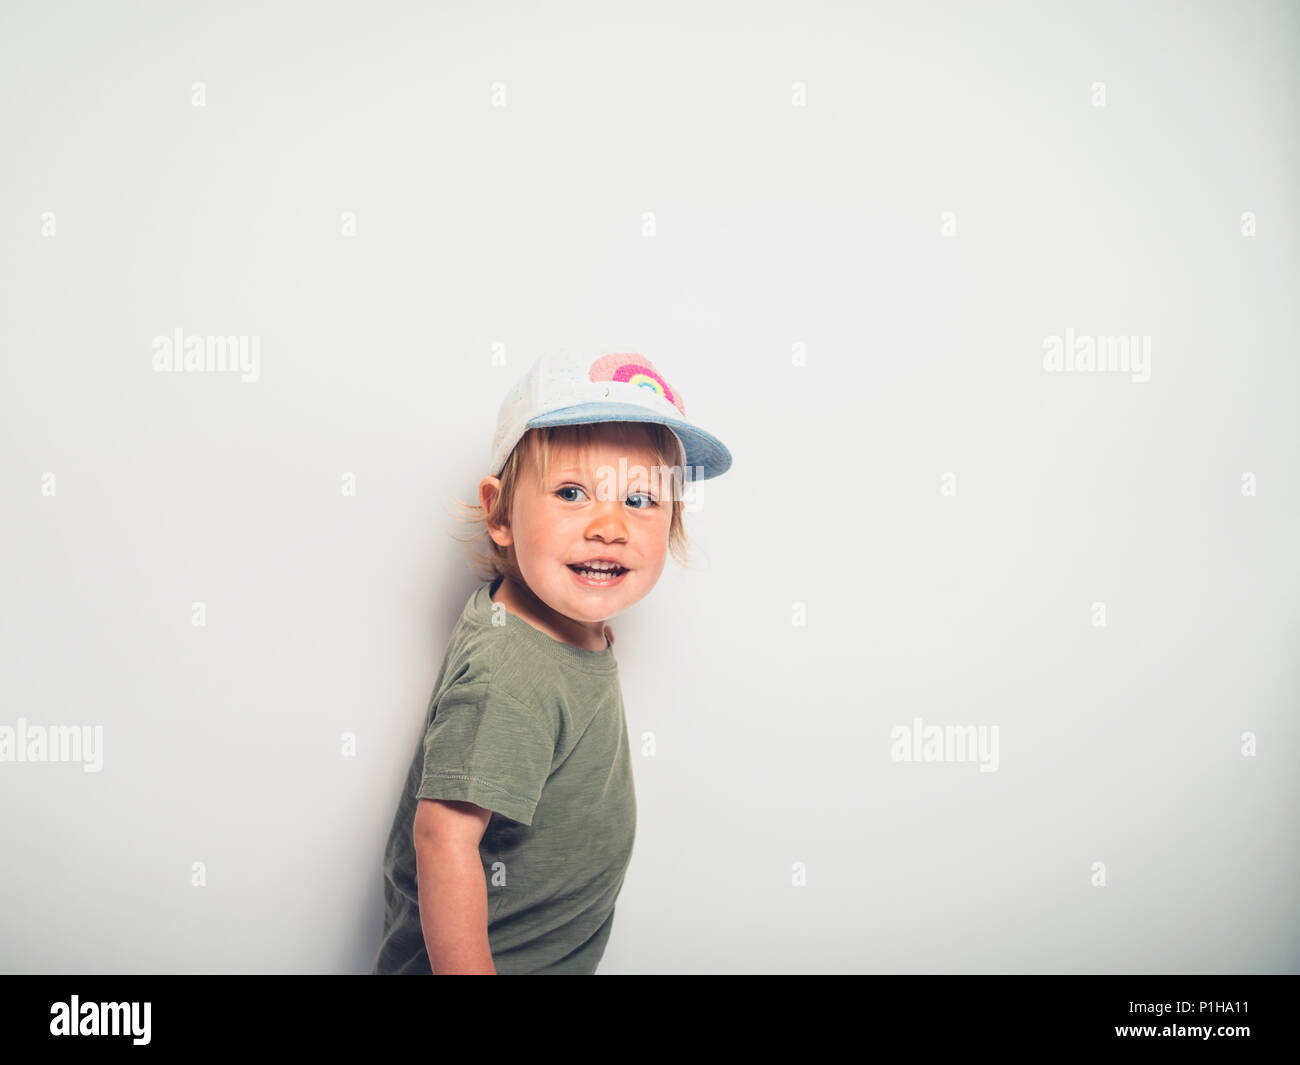 A cute little toddler boy wearing a baseball cap is striking a pose on a white background Stock Photo